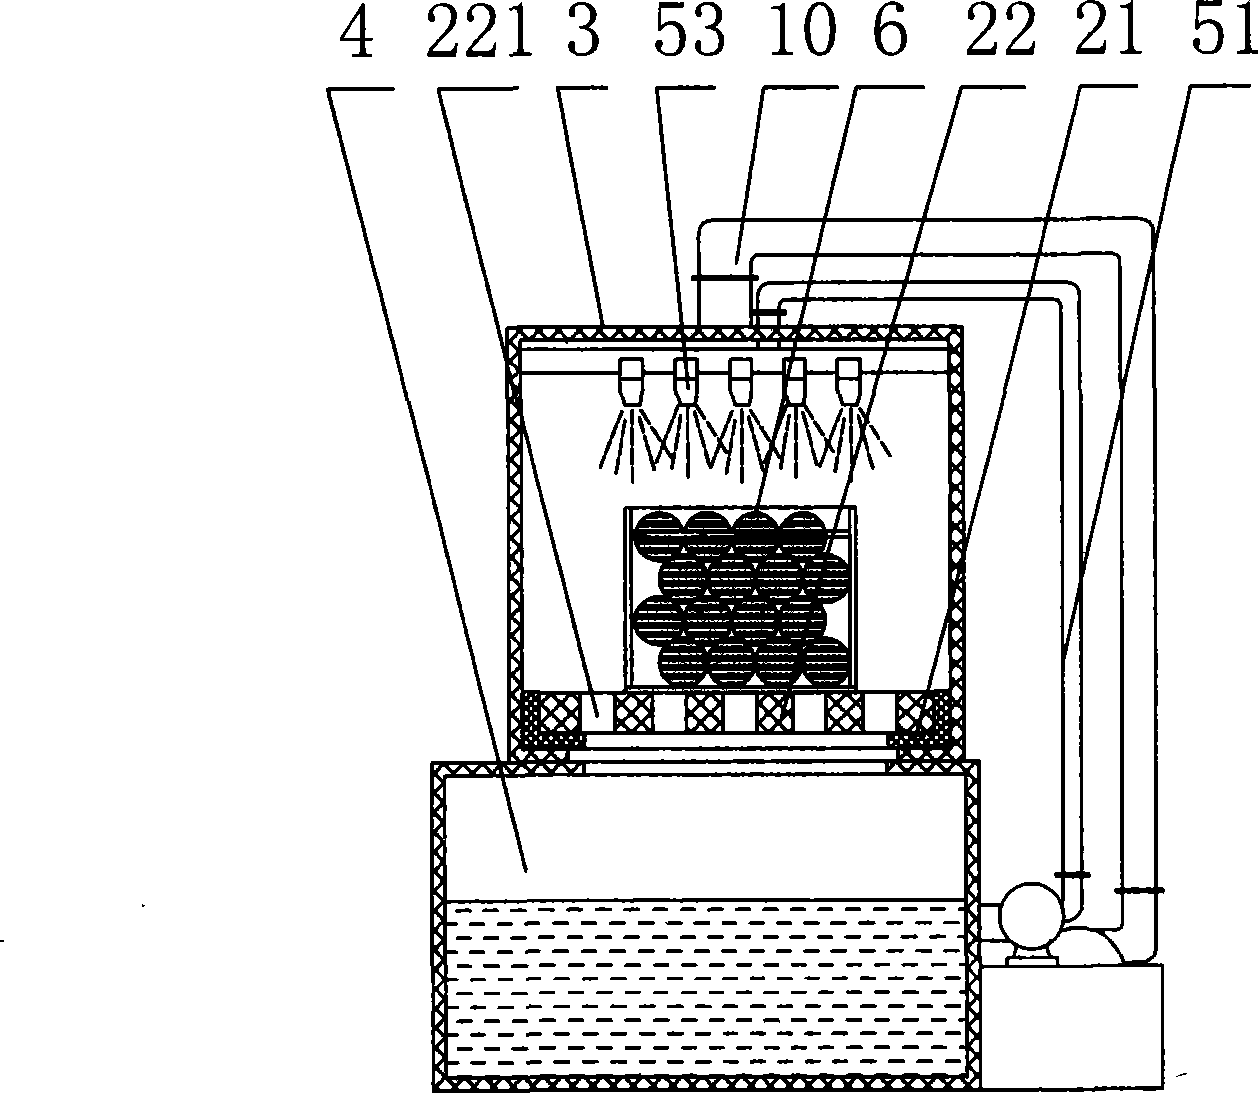 Device for cleaning vanadium-removing copper wire balls